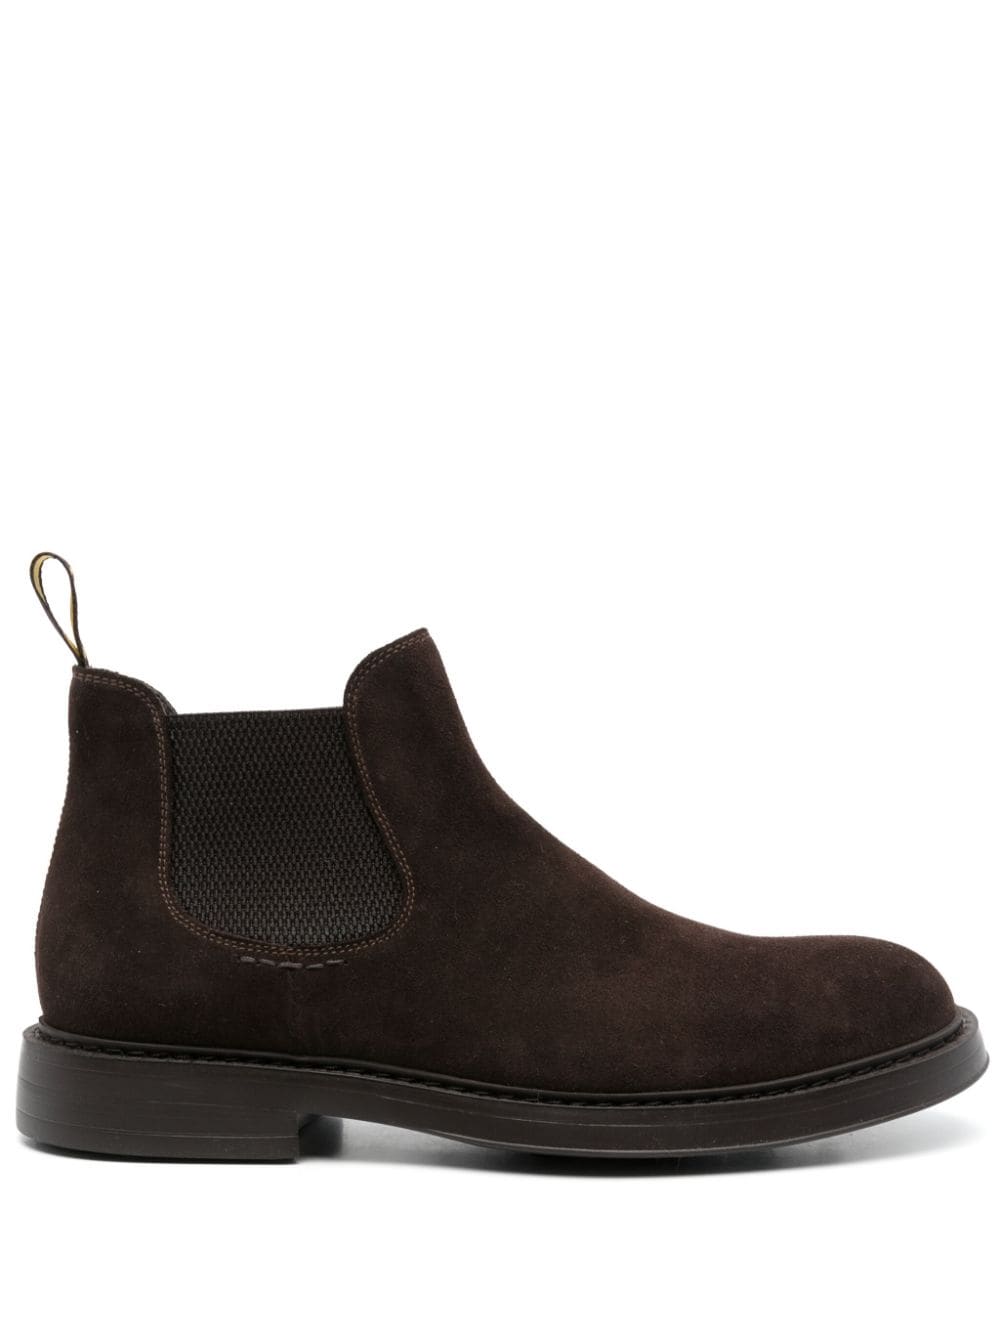 Doucal's slip-on suede Chelsea boots - Brown von Doucal's